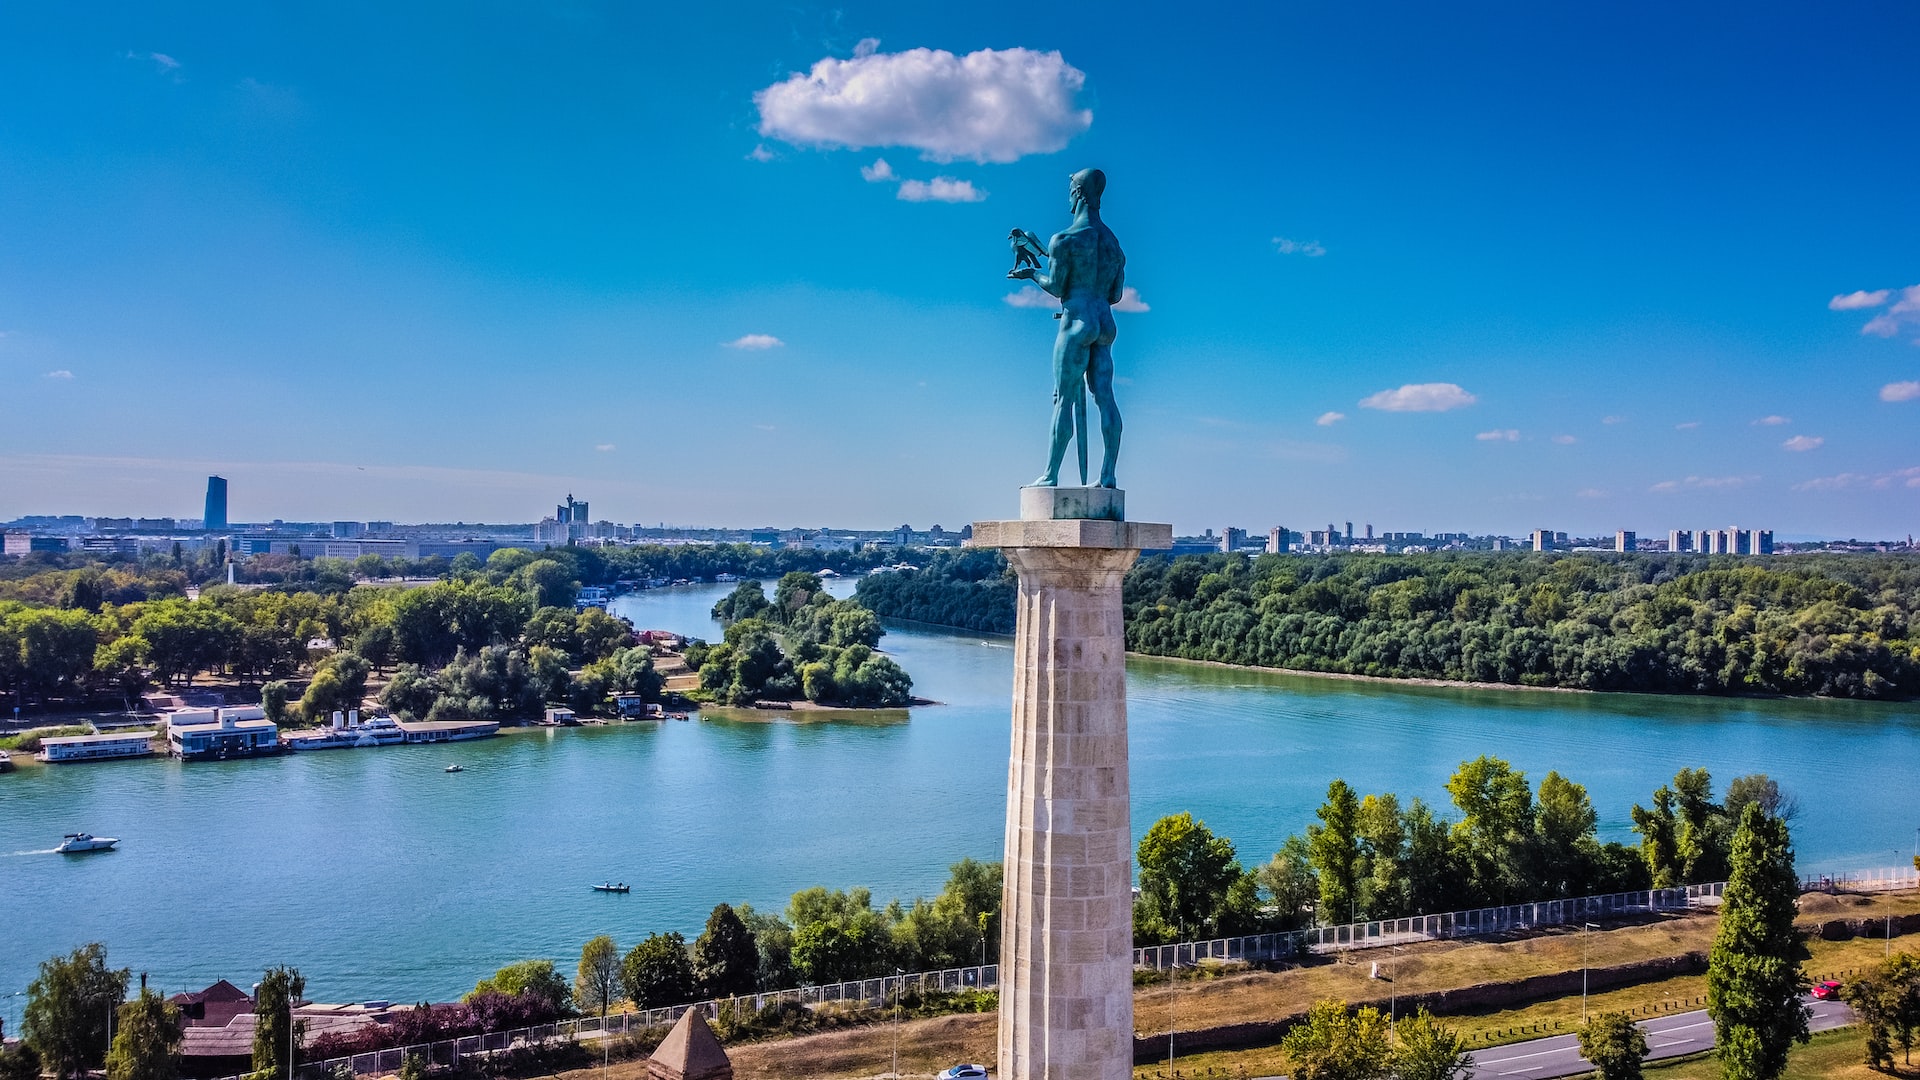 BELGRADE BREAKS THE RECORD FOR THE NUMBER OF TOURISTS